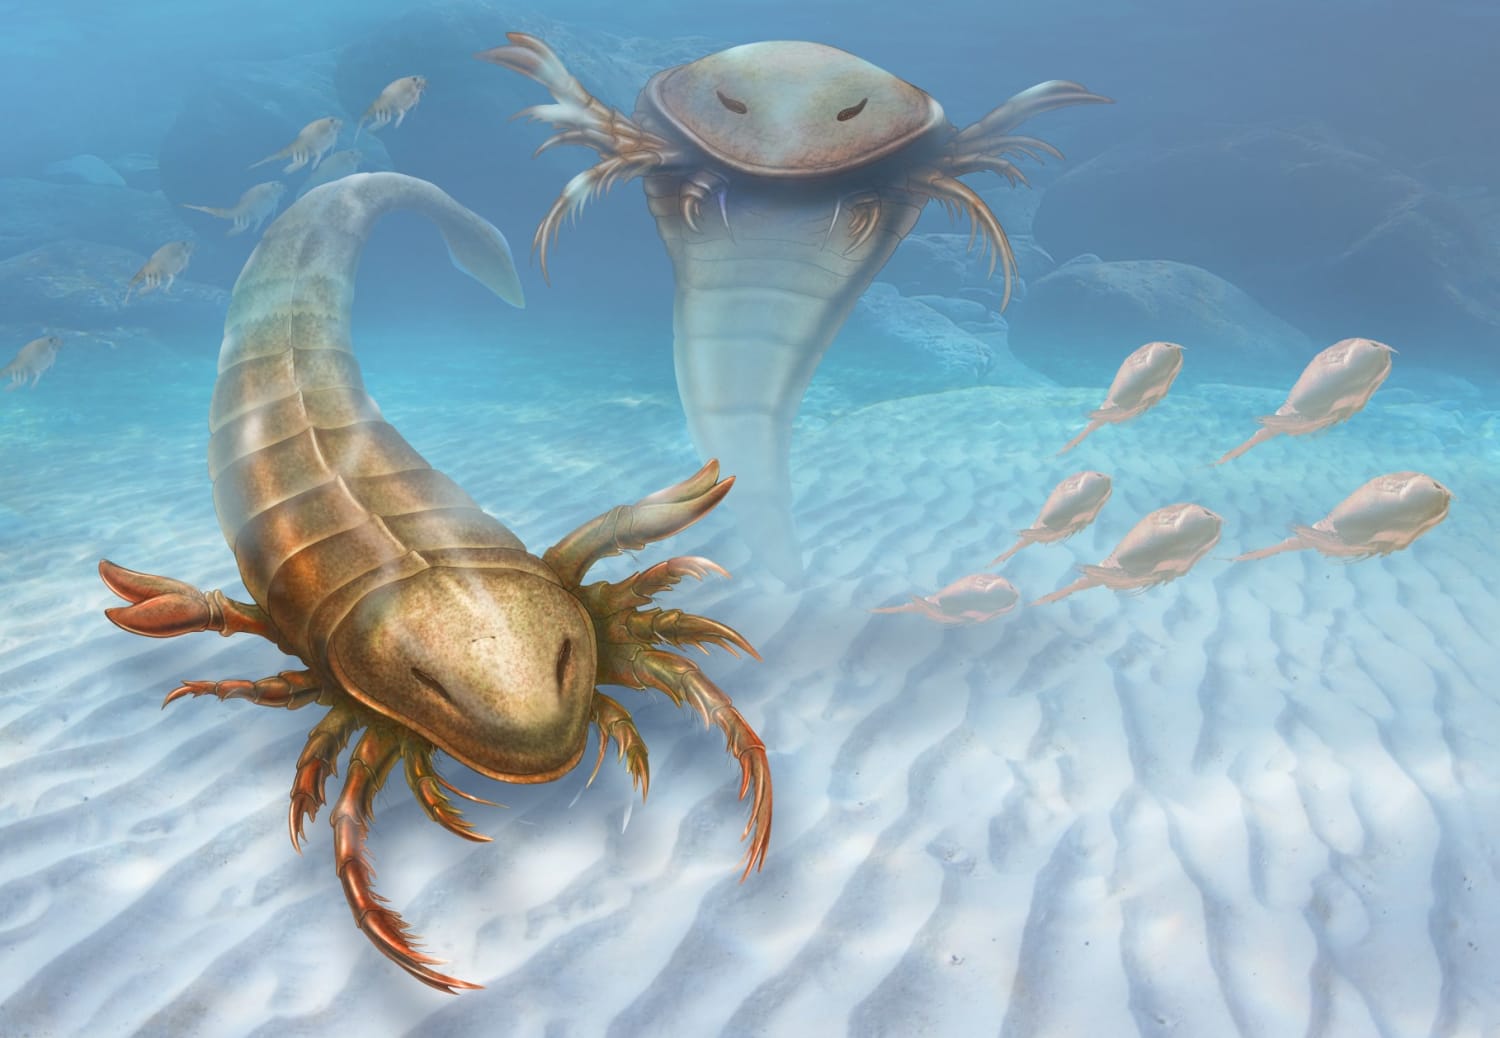 Fossils Reveal Oldest Known Human-Sized 'Sea Scorpion'